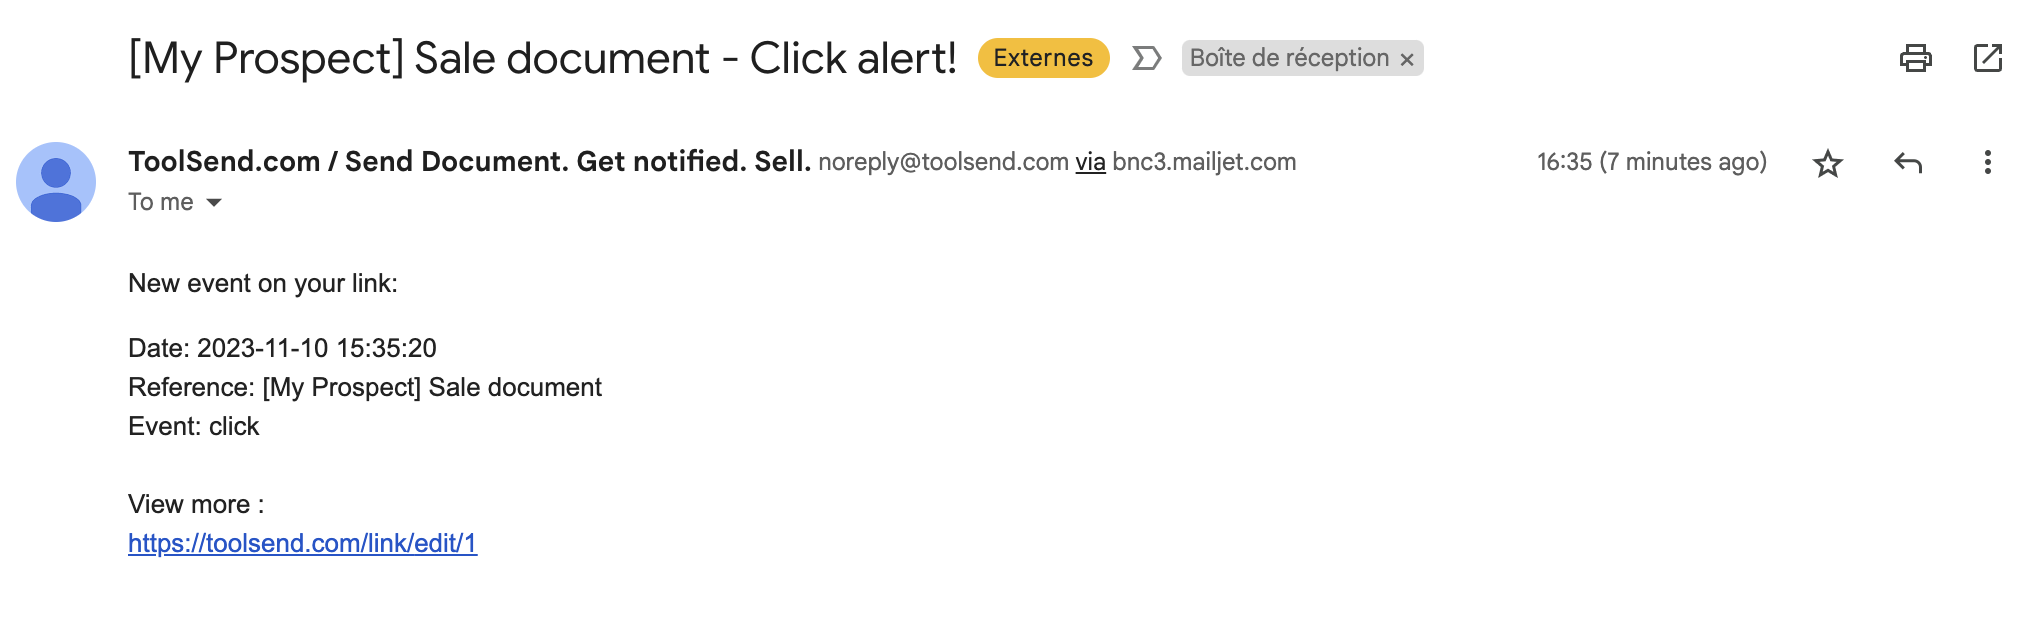 ToolSend - Click alert on your sale document!